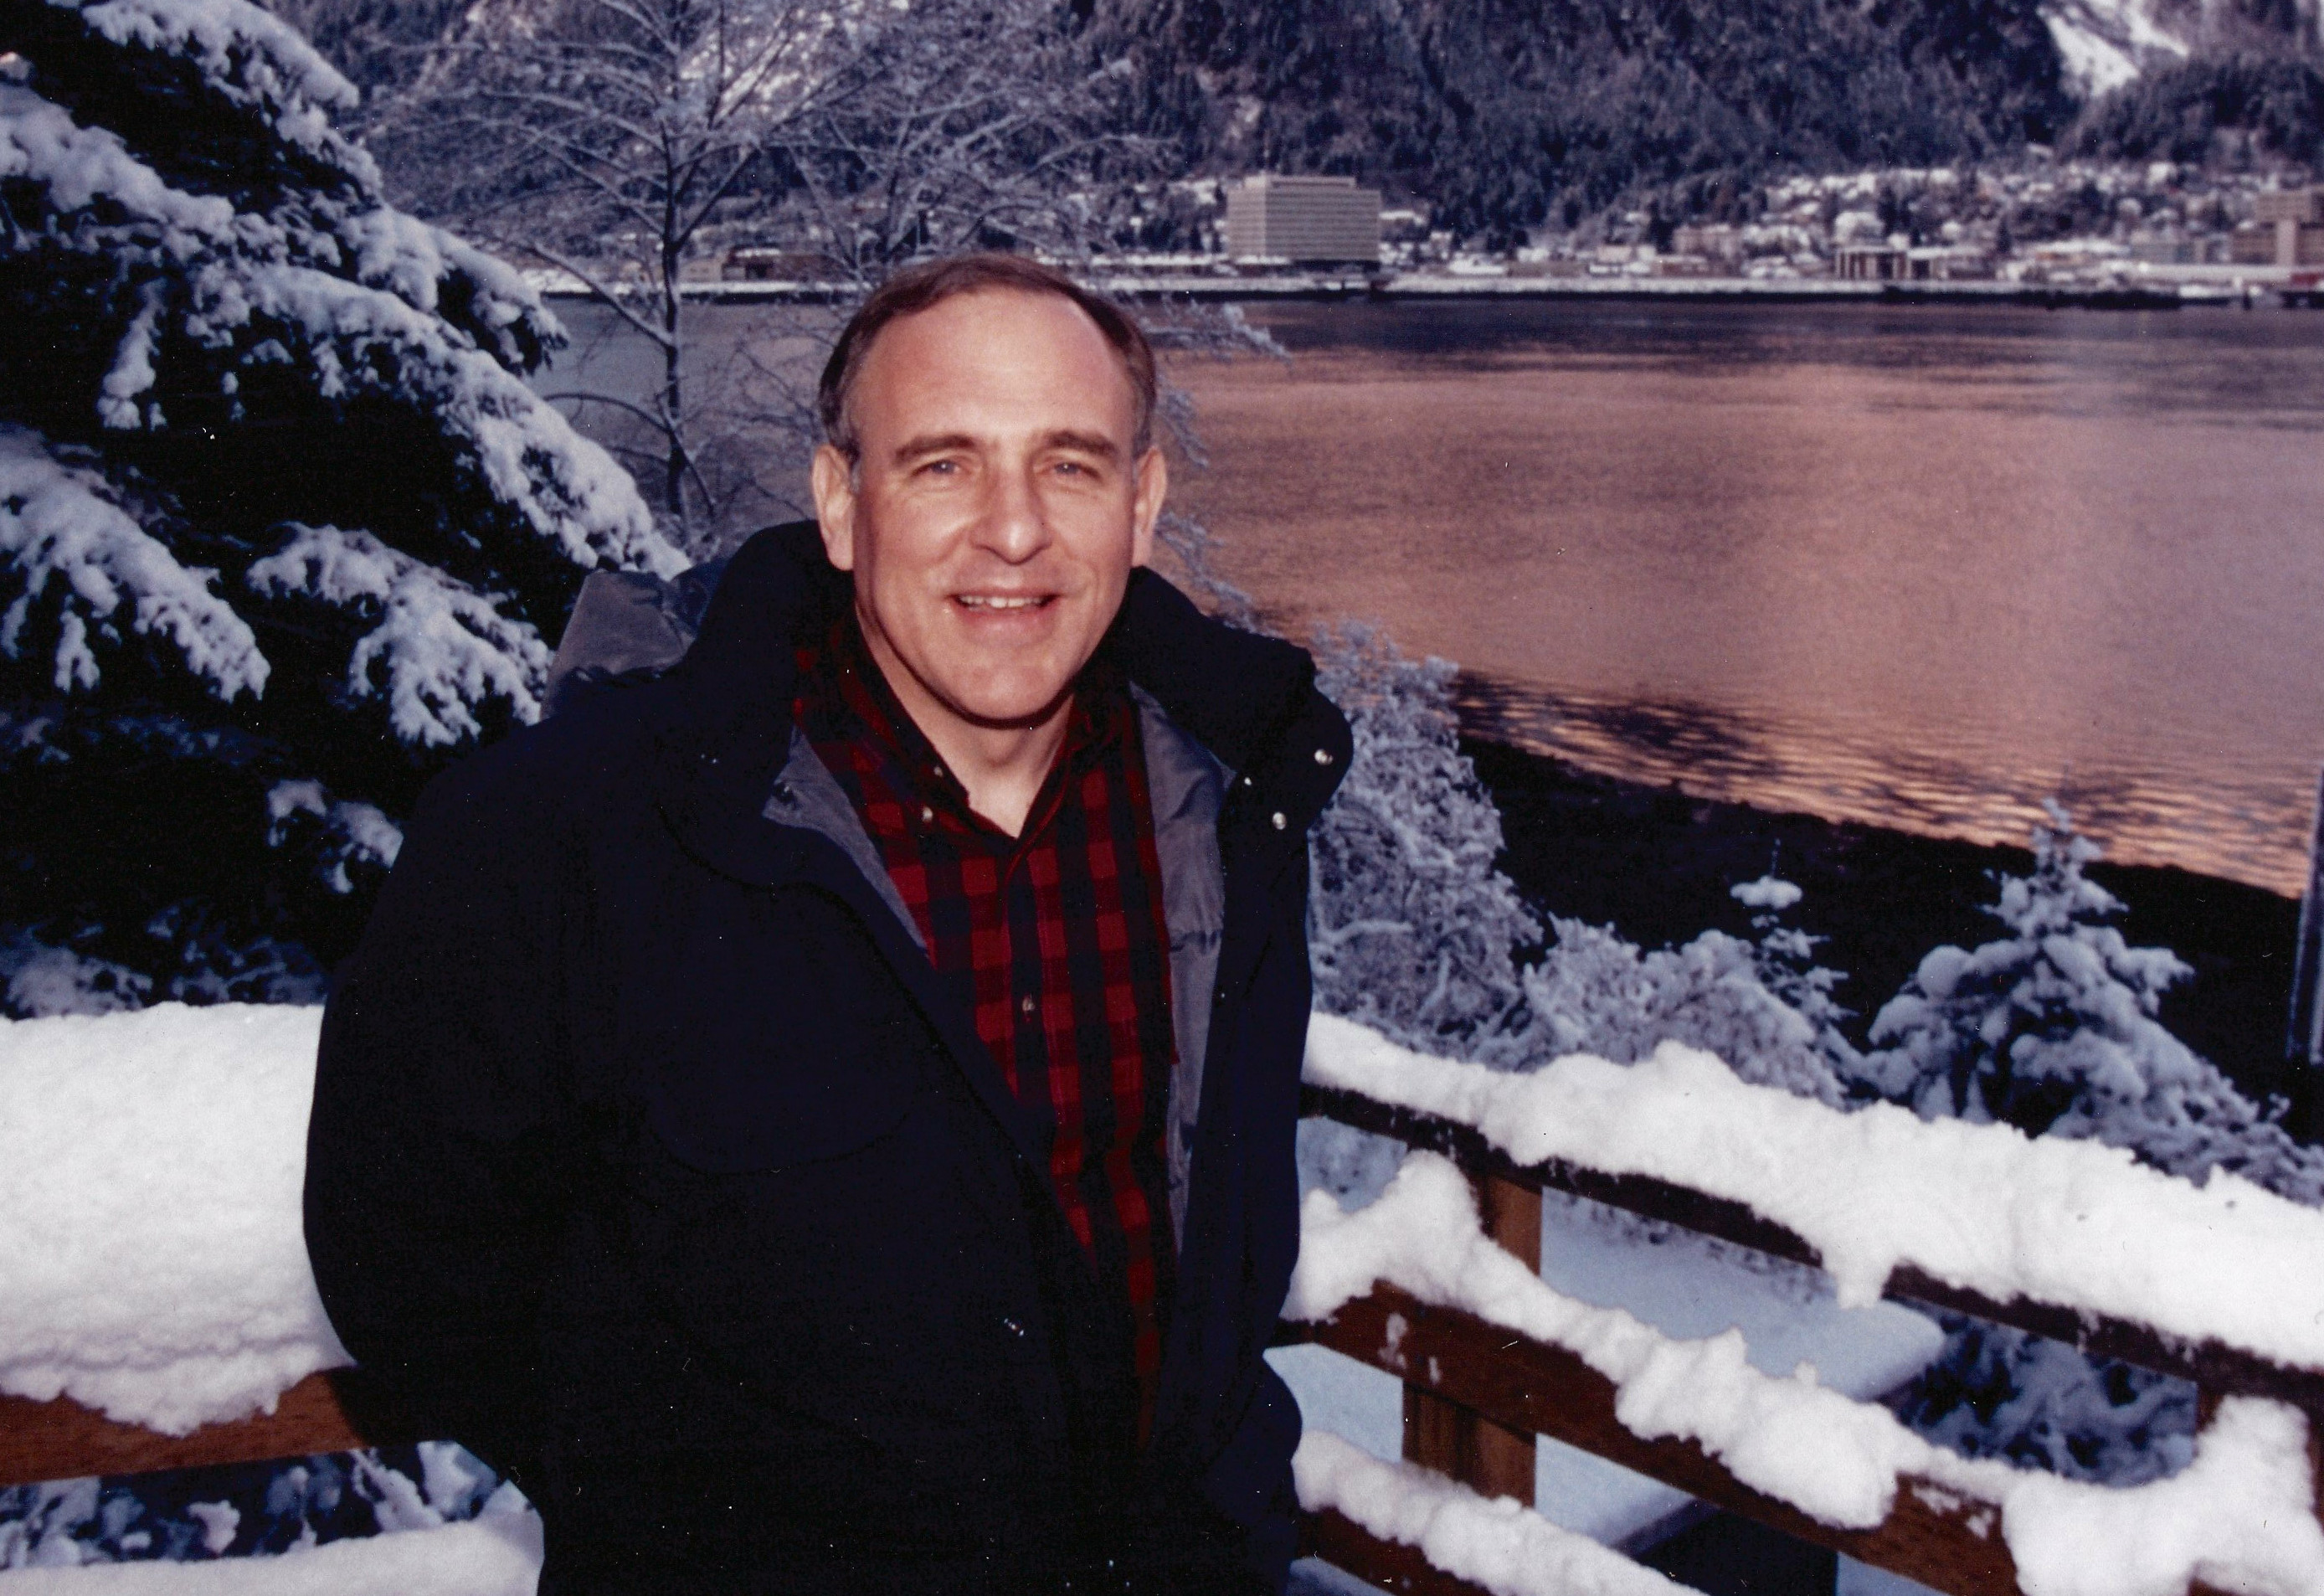 Jamie Parsons was named Juneau Citizen of the Year in 1994, around the time this photo was taken. (Photo courtesy Win Gruening)